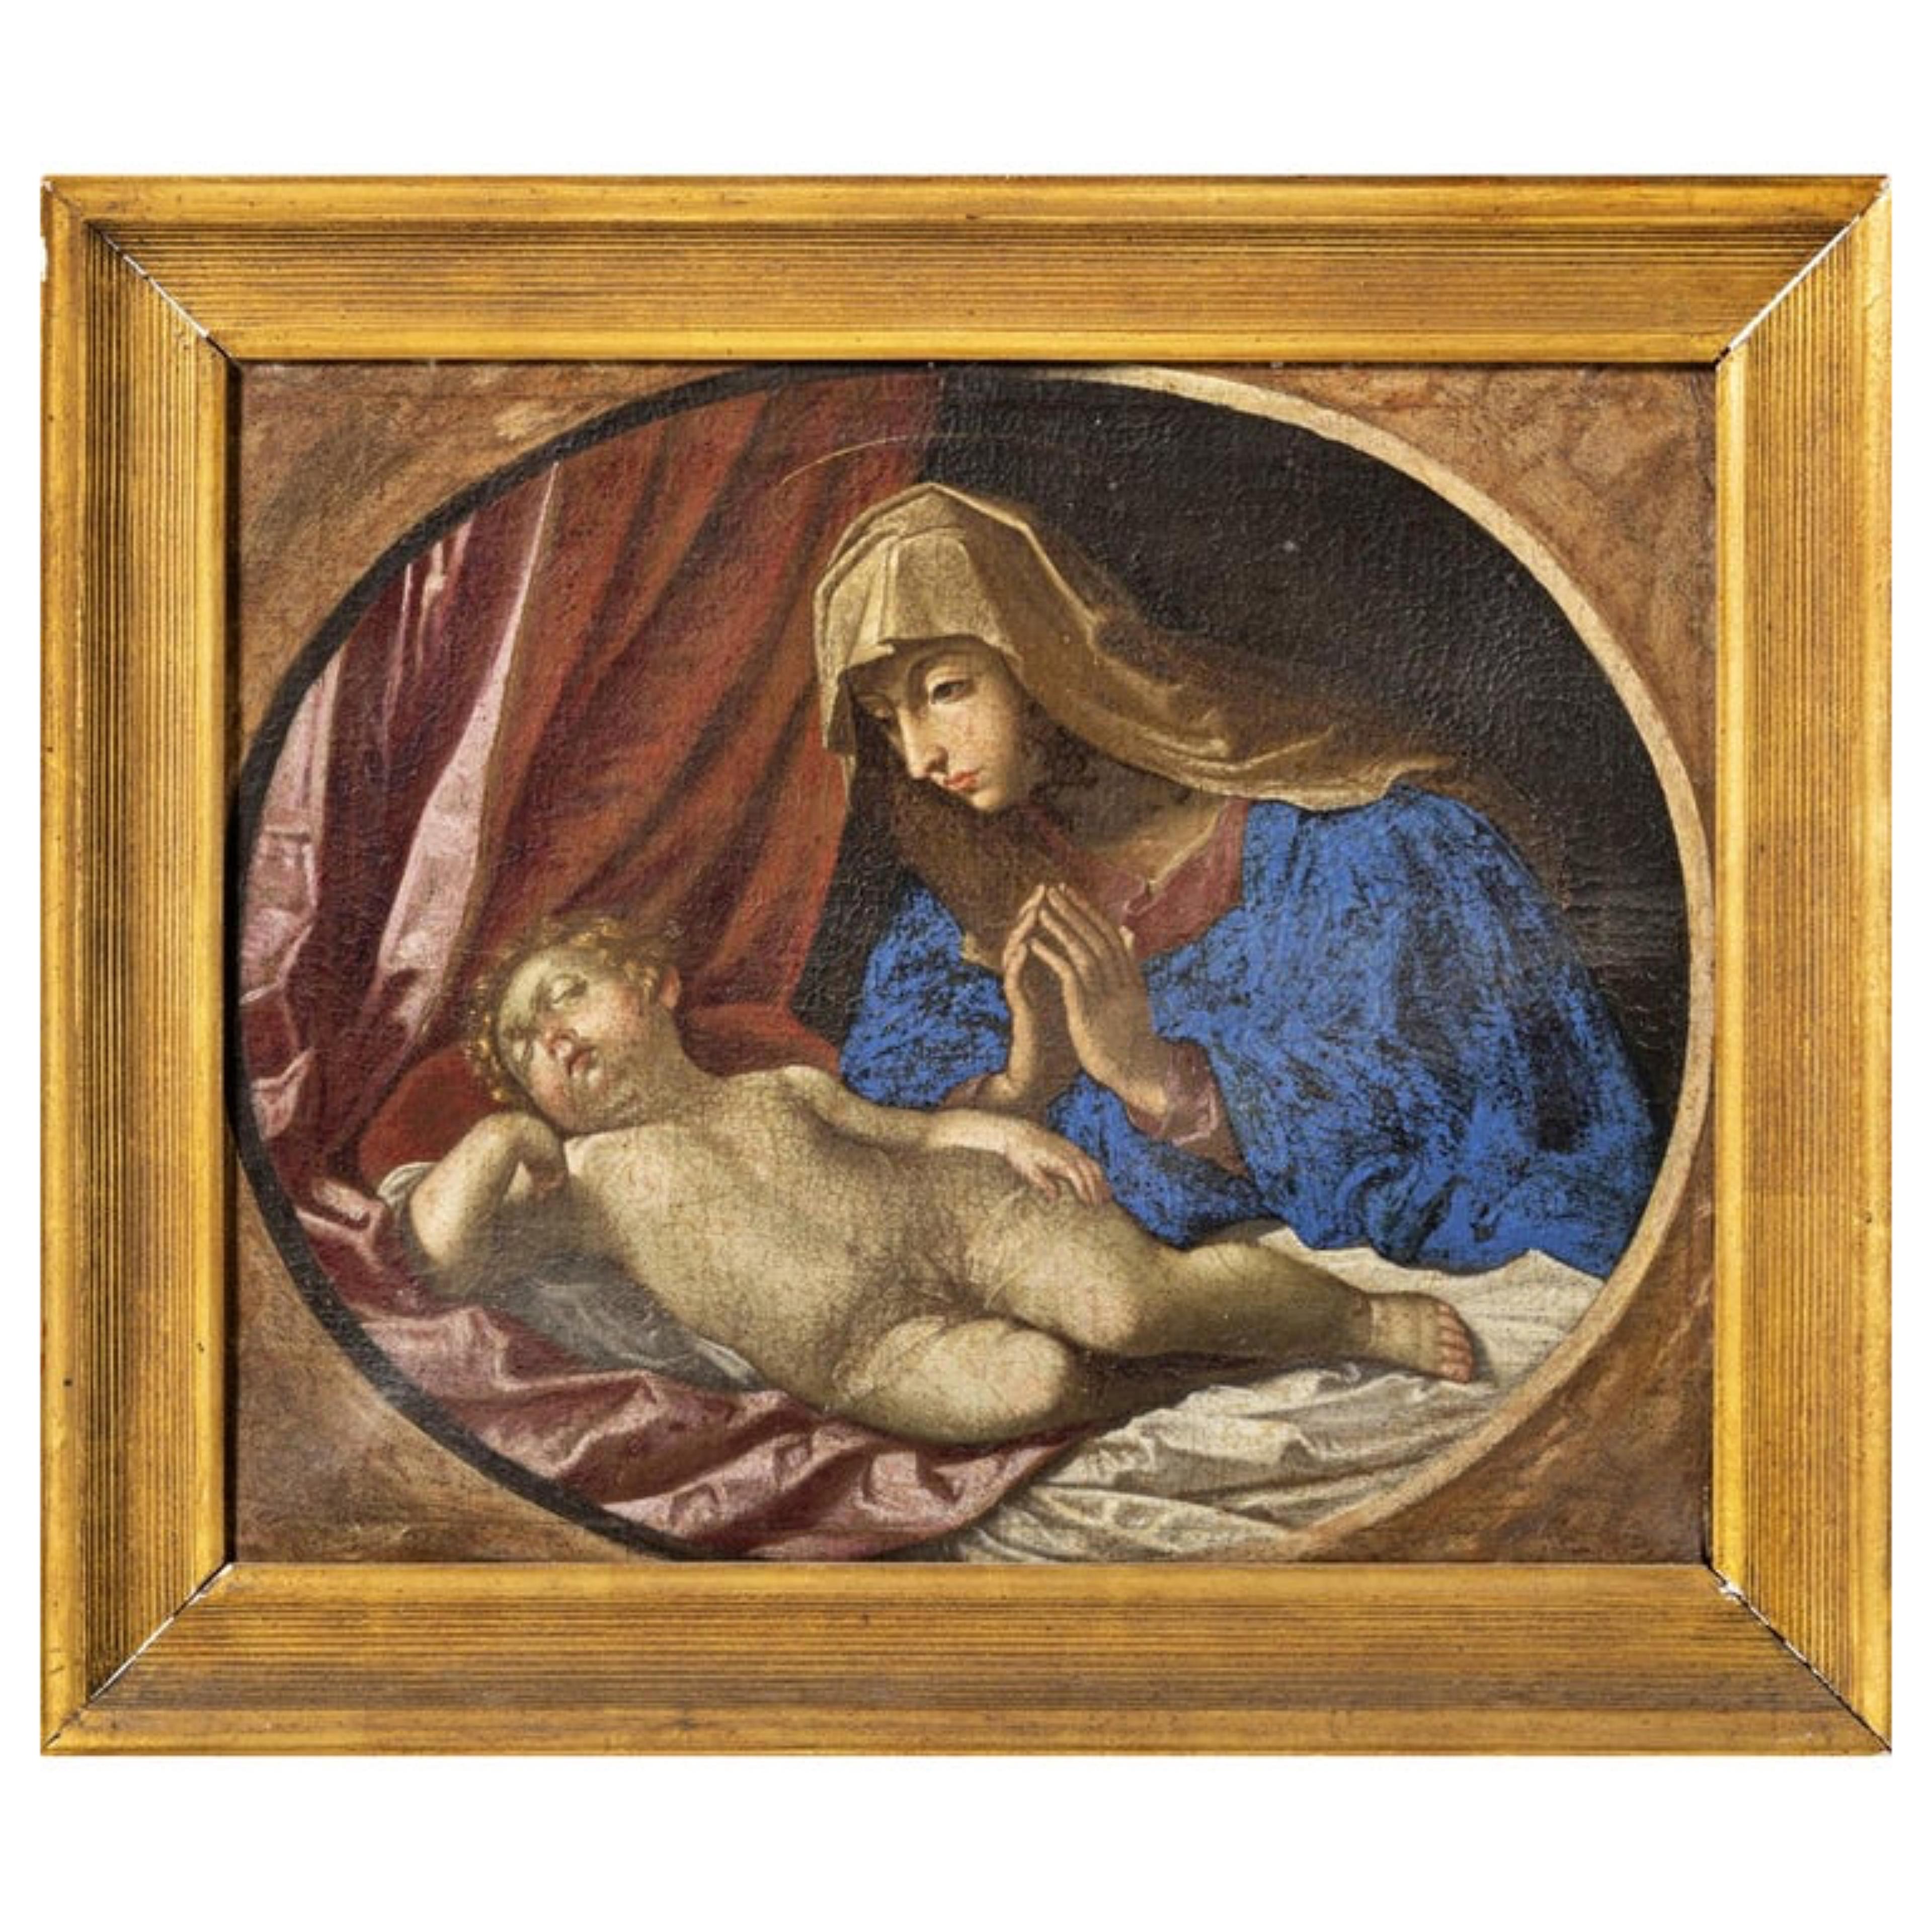 Our Lady with the Child Jesus 18th Century Italian School In Good Condition For Sale In Madrid, ES